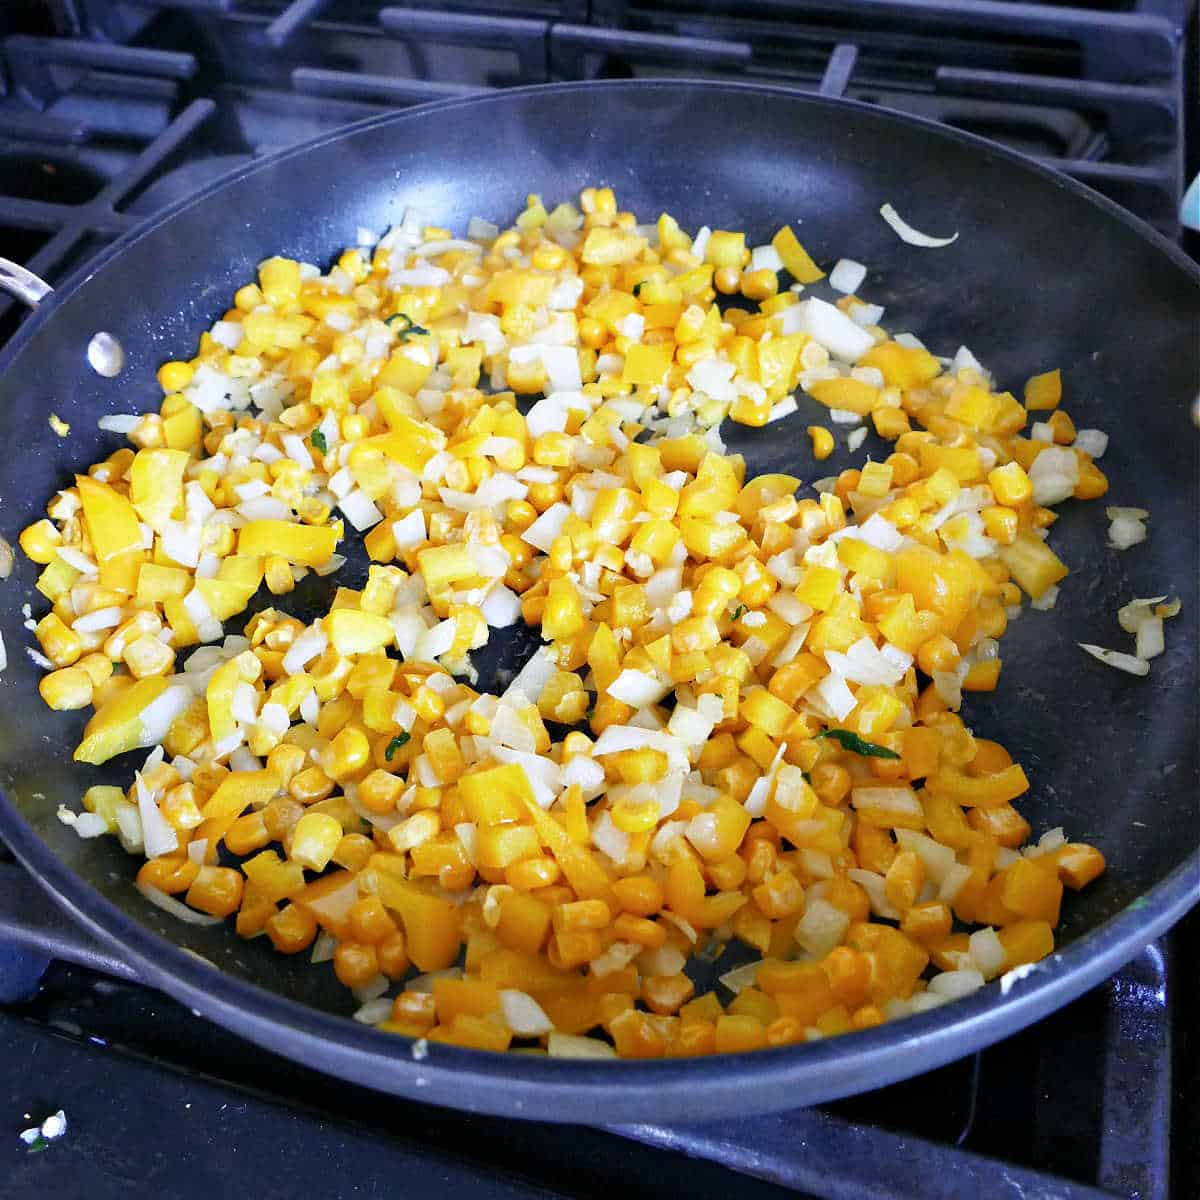 peppers, onions, and corn cooking in oil in a skillet on a stove